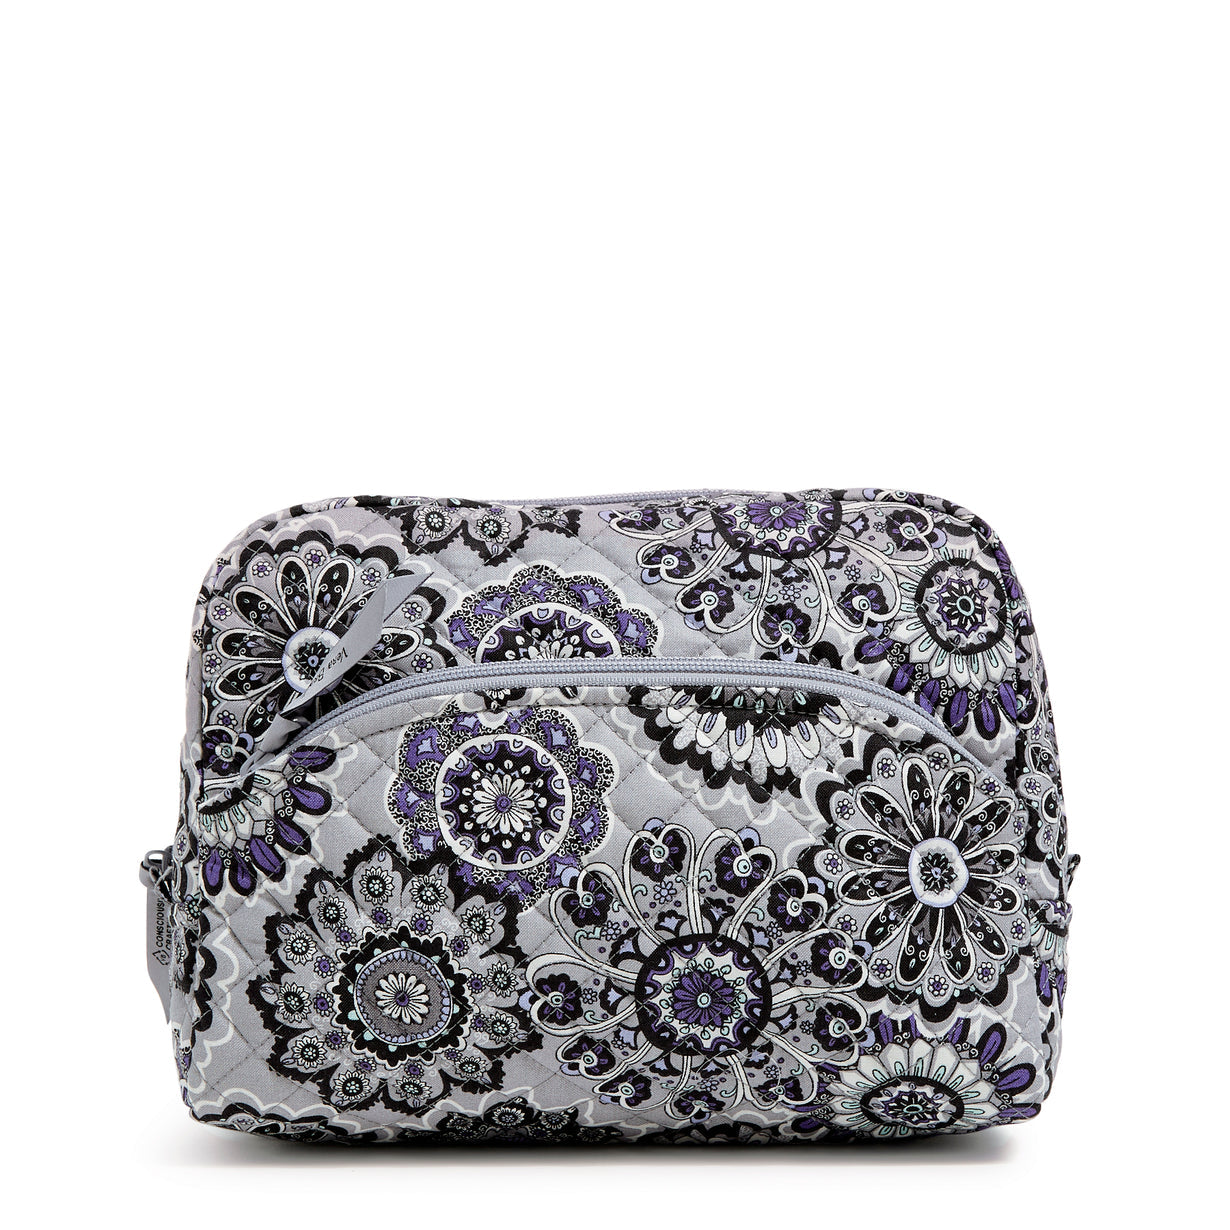 A Large Cosmetic bag from Vera Bradley in their new Tranquil Medallion pattern.